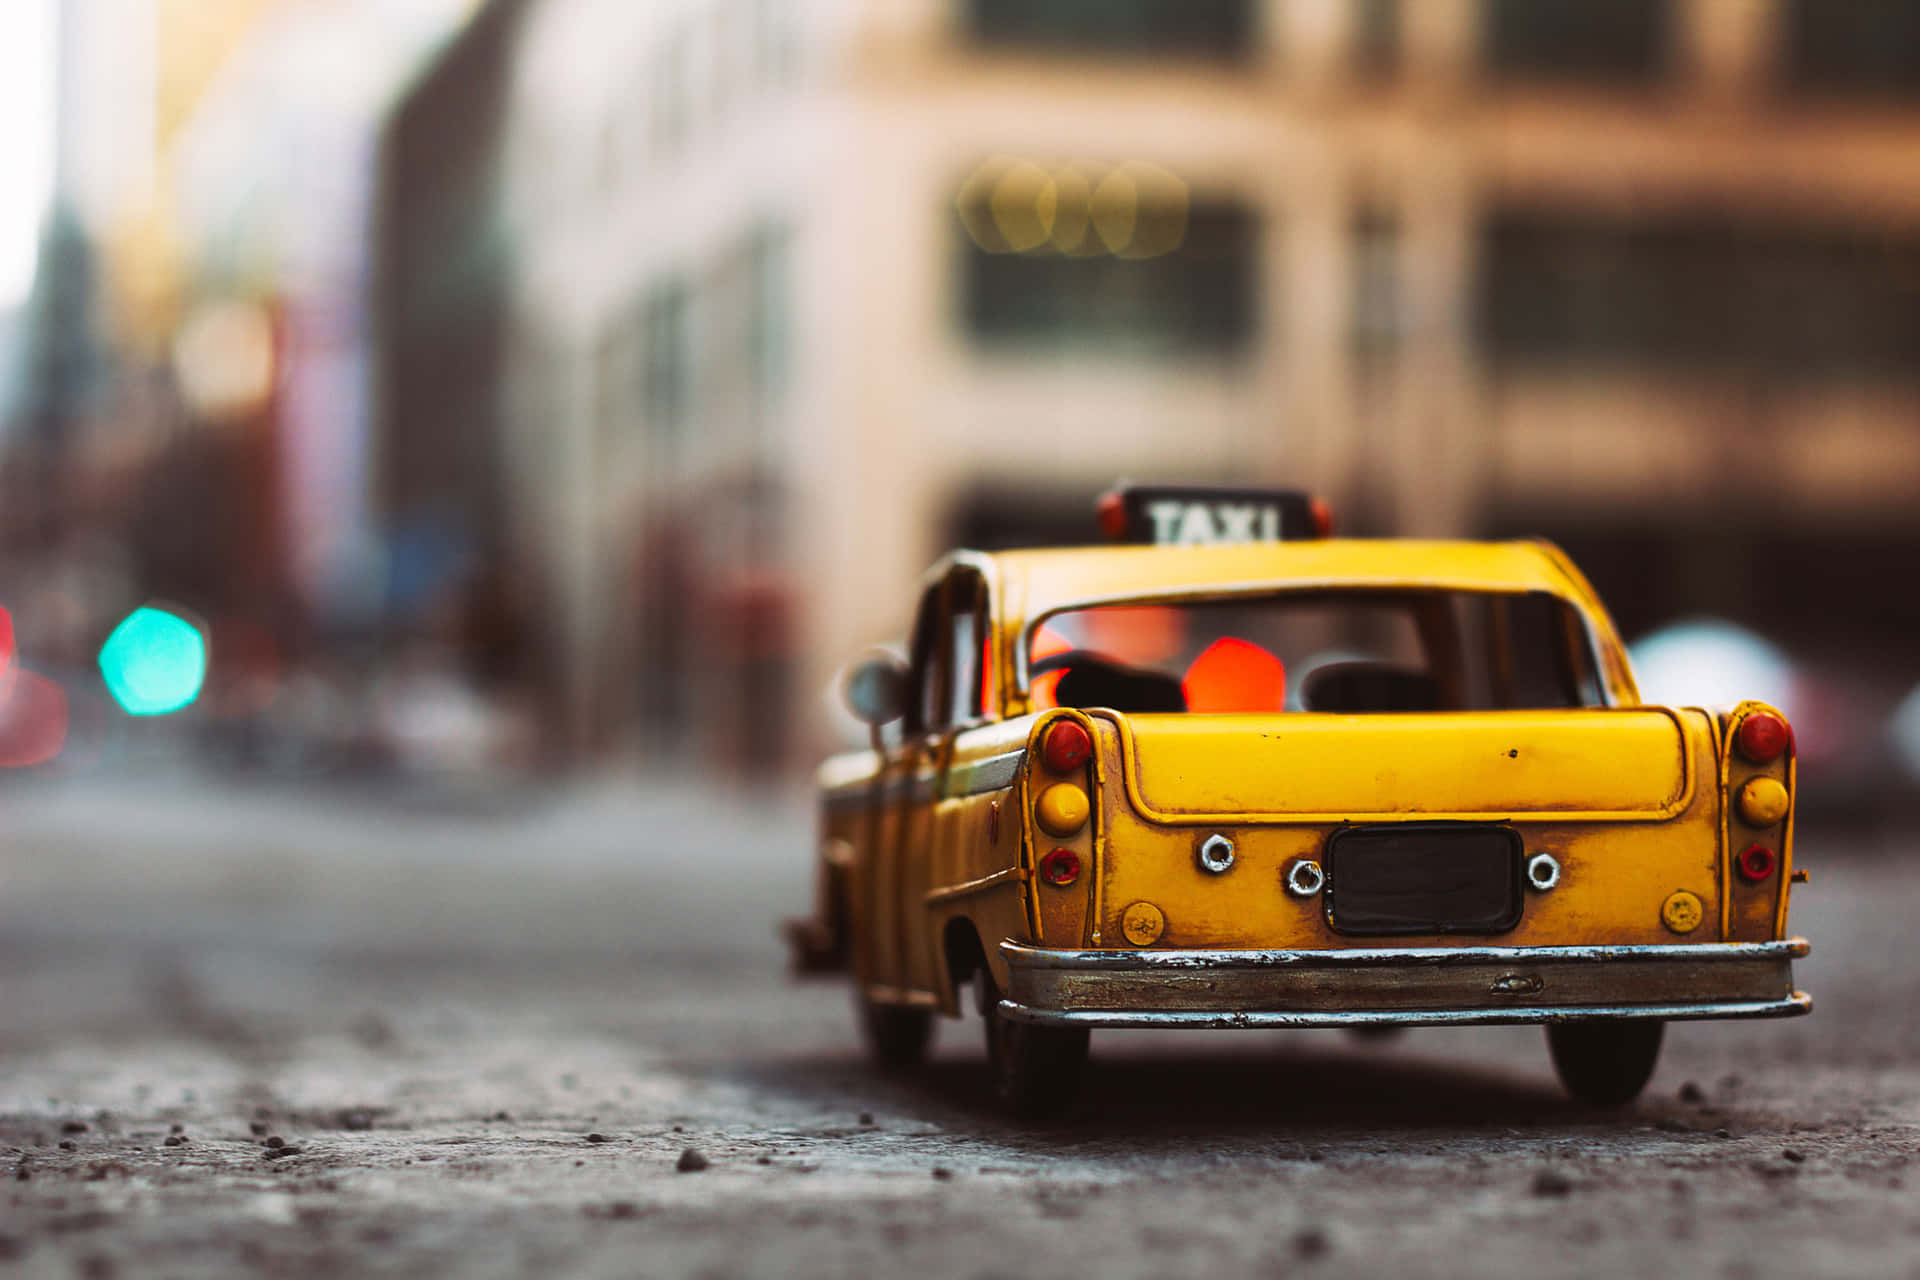 Ride with ease with the modern taxi